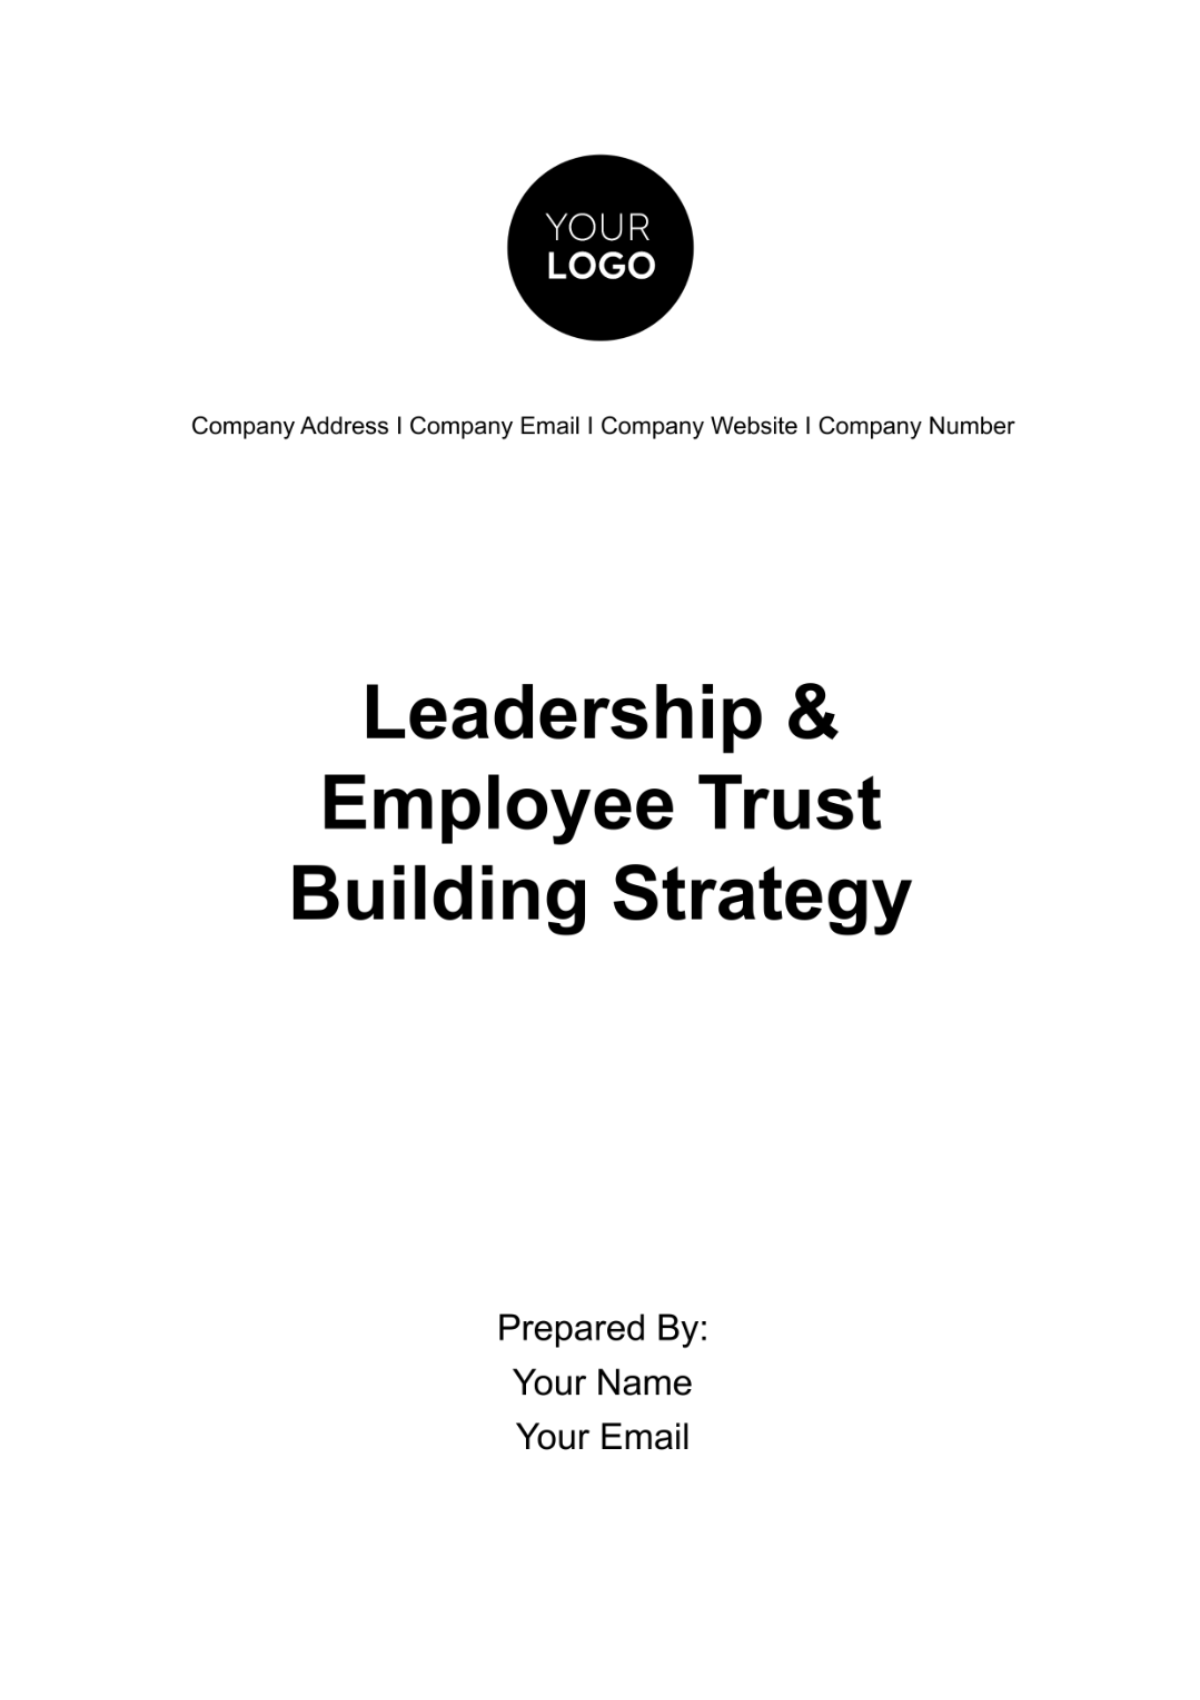 Free Leadership & Employee Trust Building Strategy HR Template